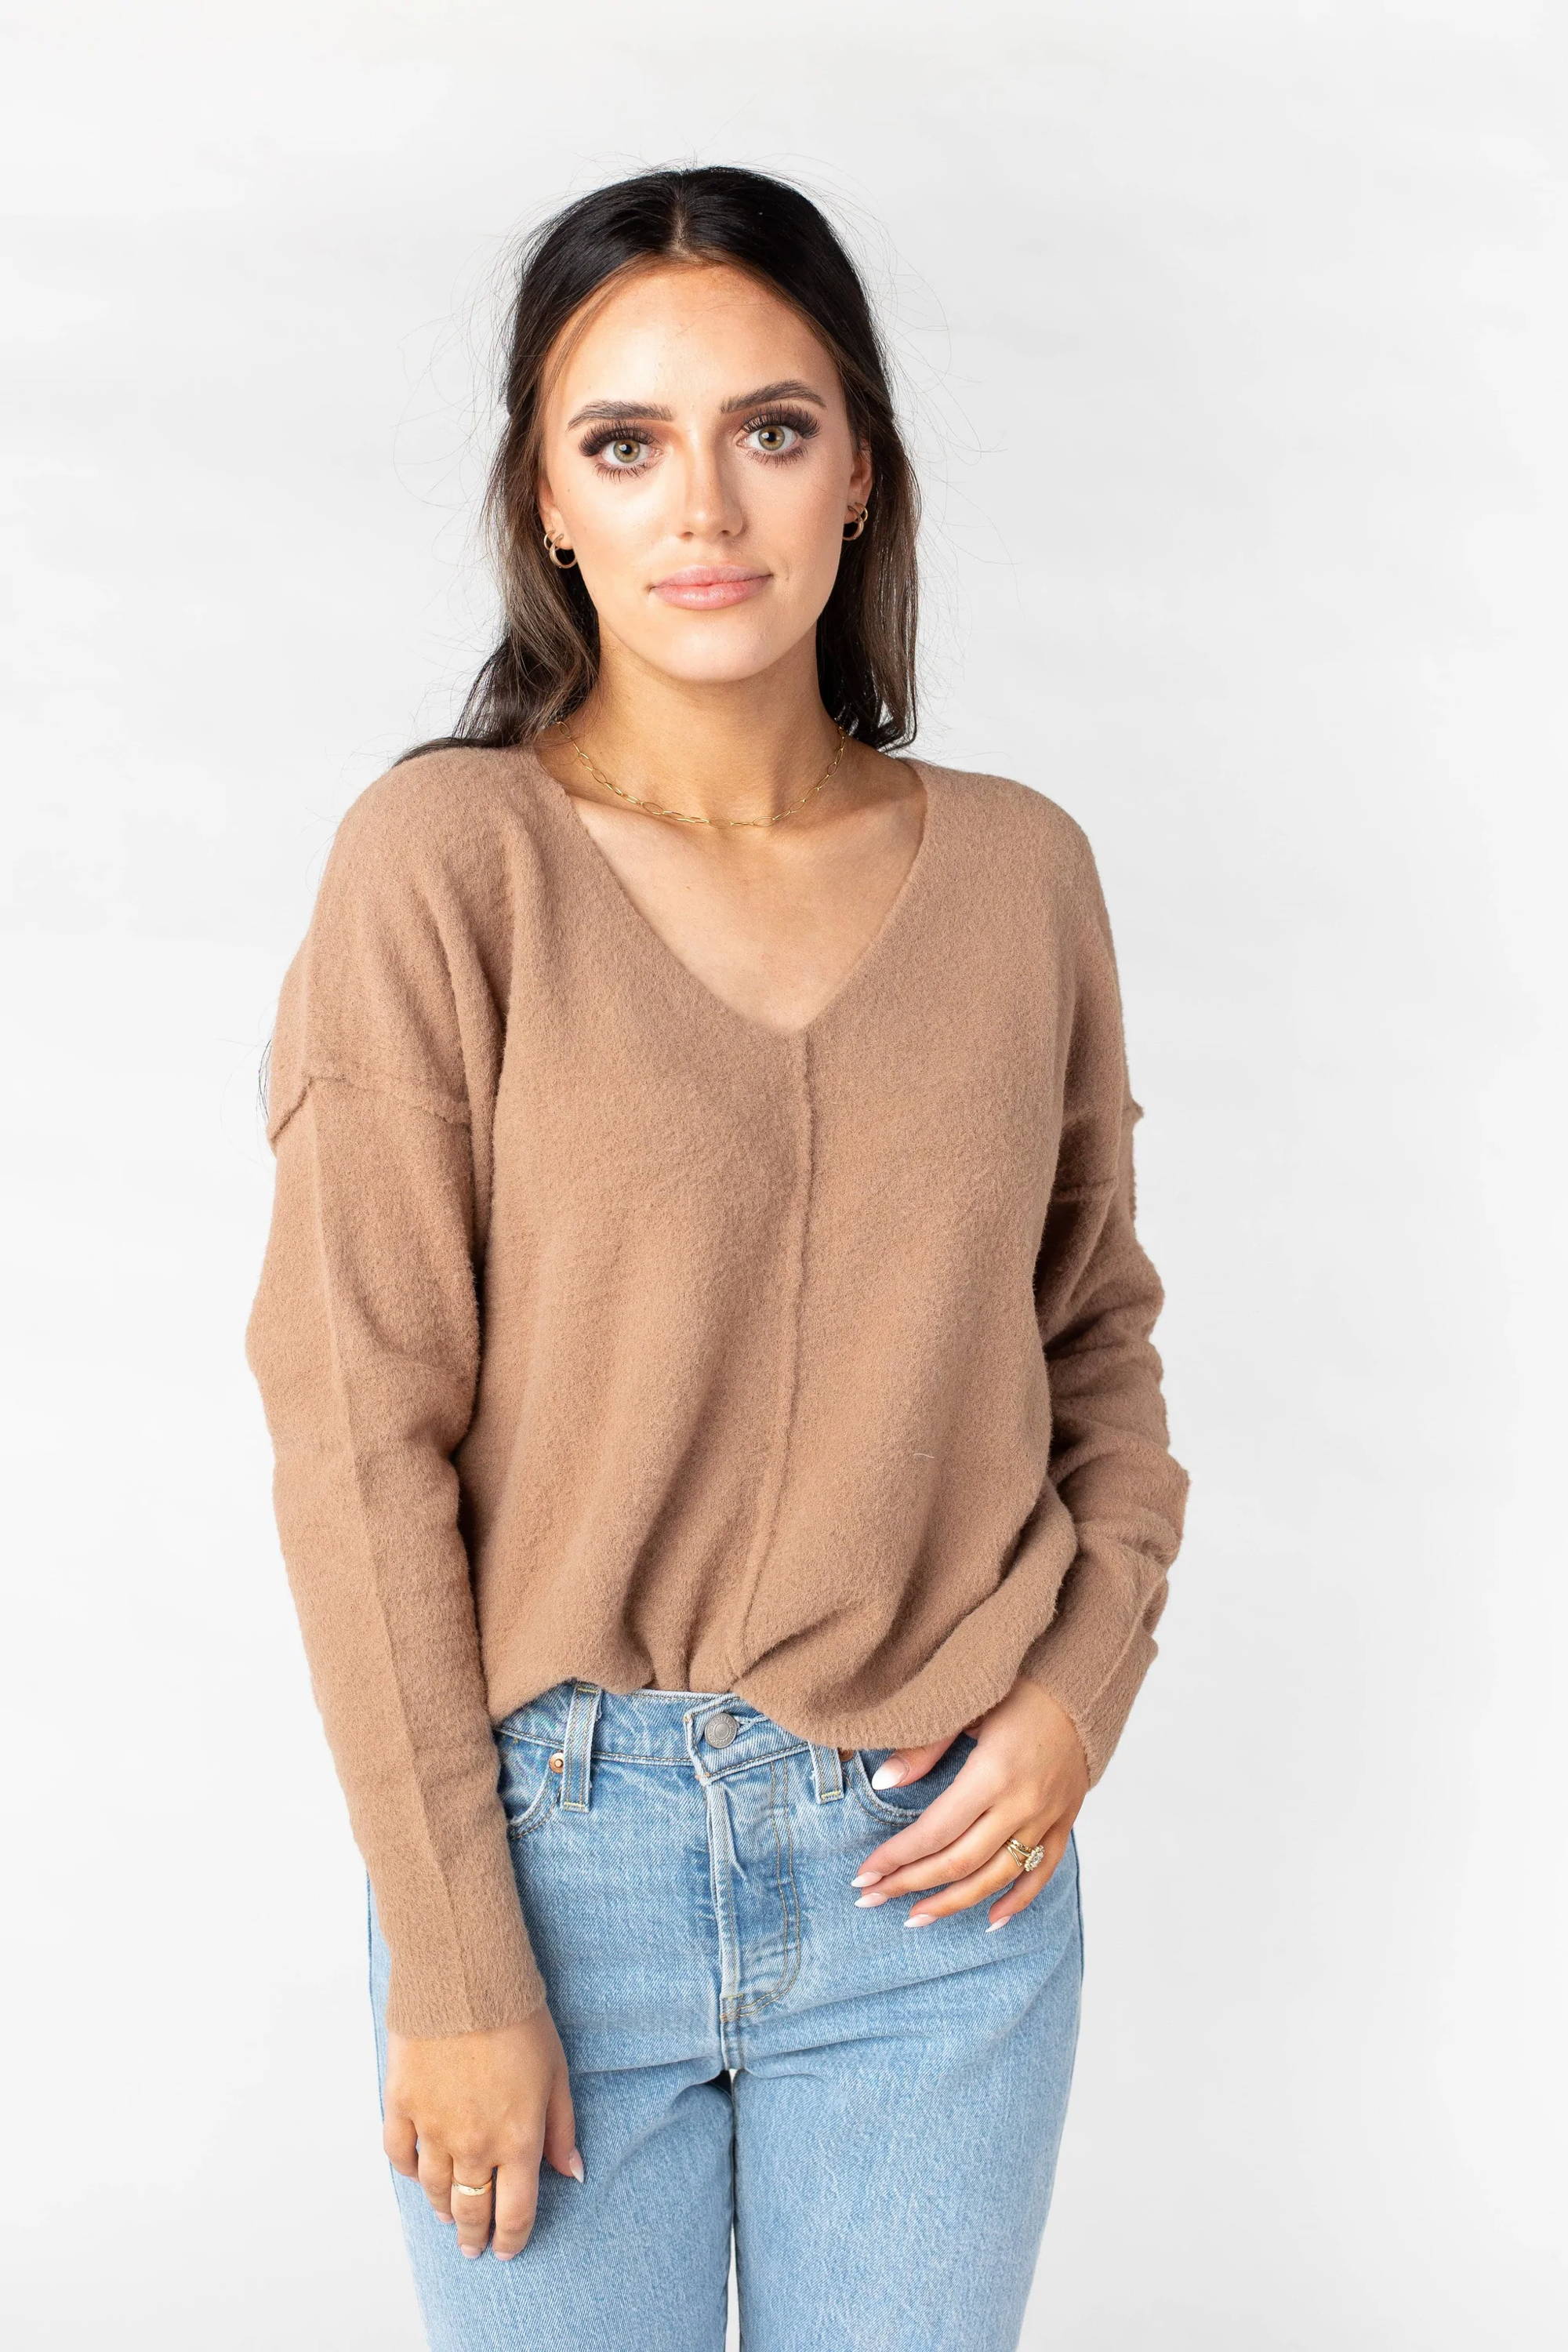 A woman poses in a neutral sweater